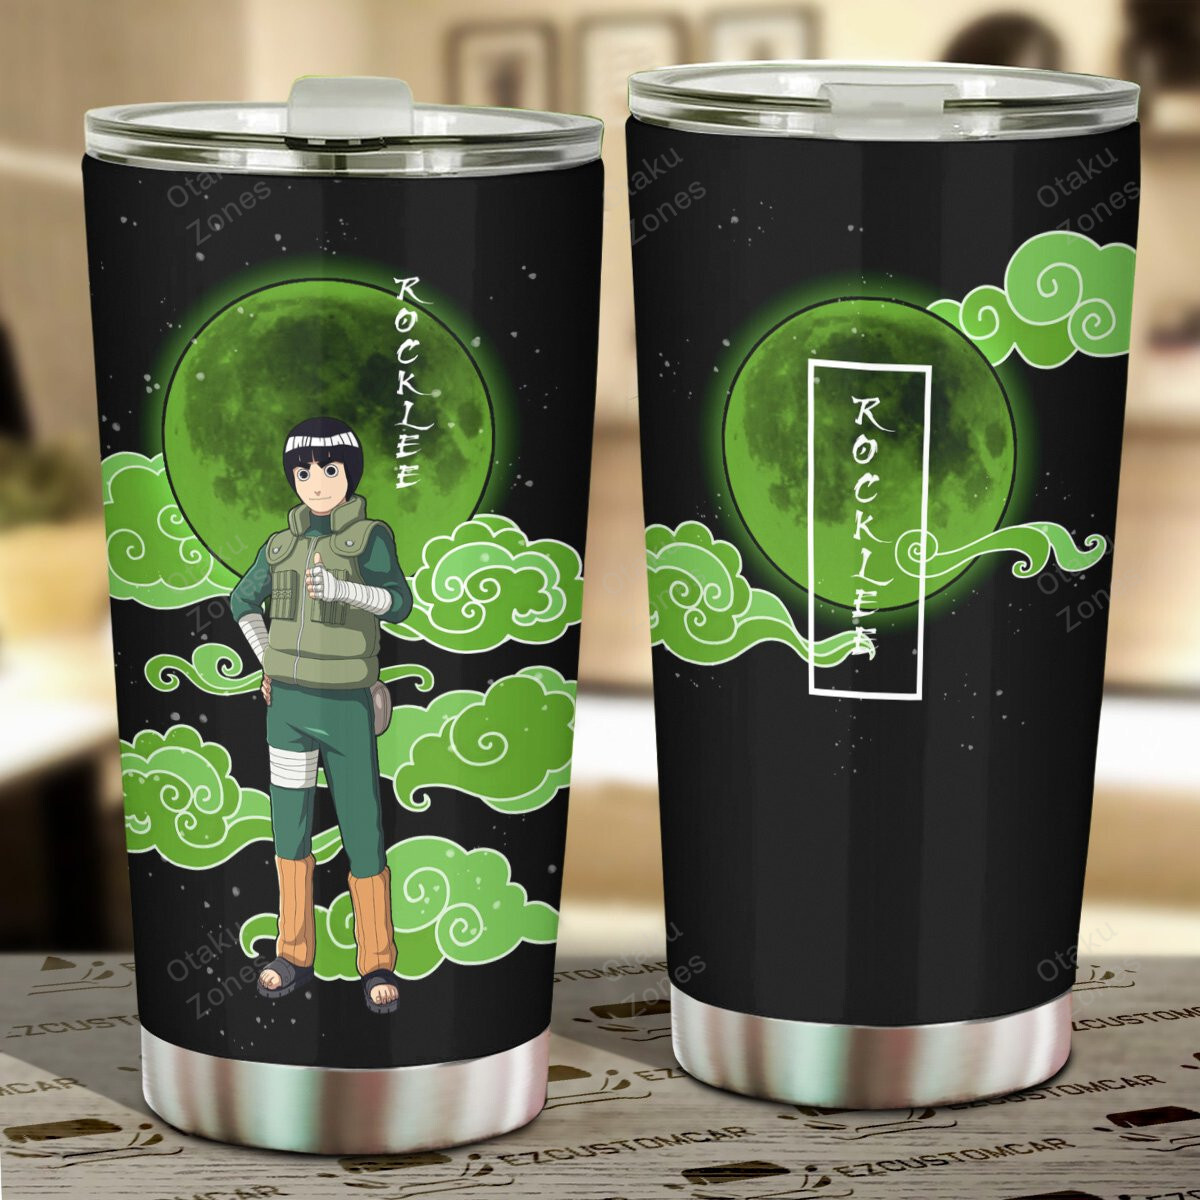 Go ahead and order your new tumbler now! 47